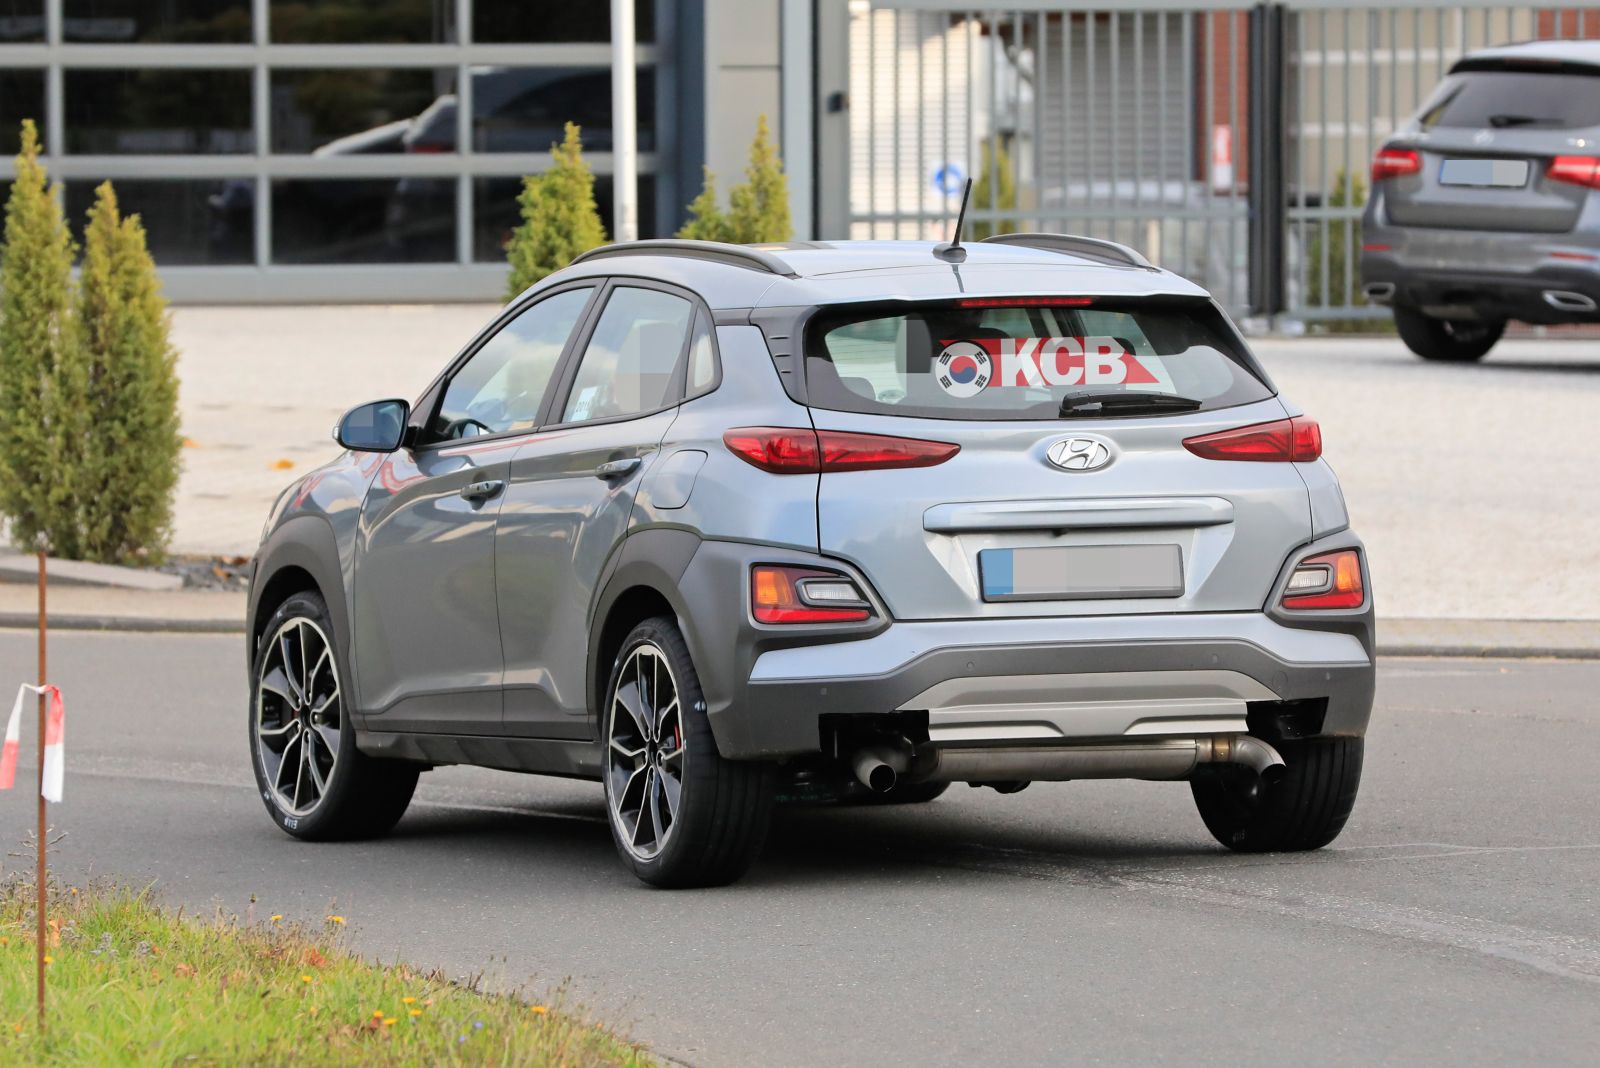 Hyundai KONA N Test Mule Spied for the First Time